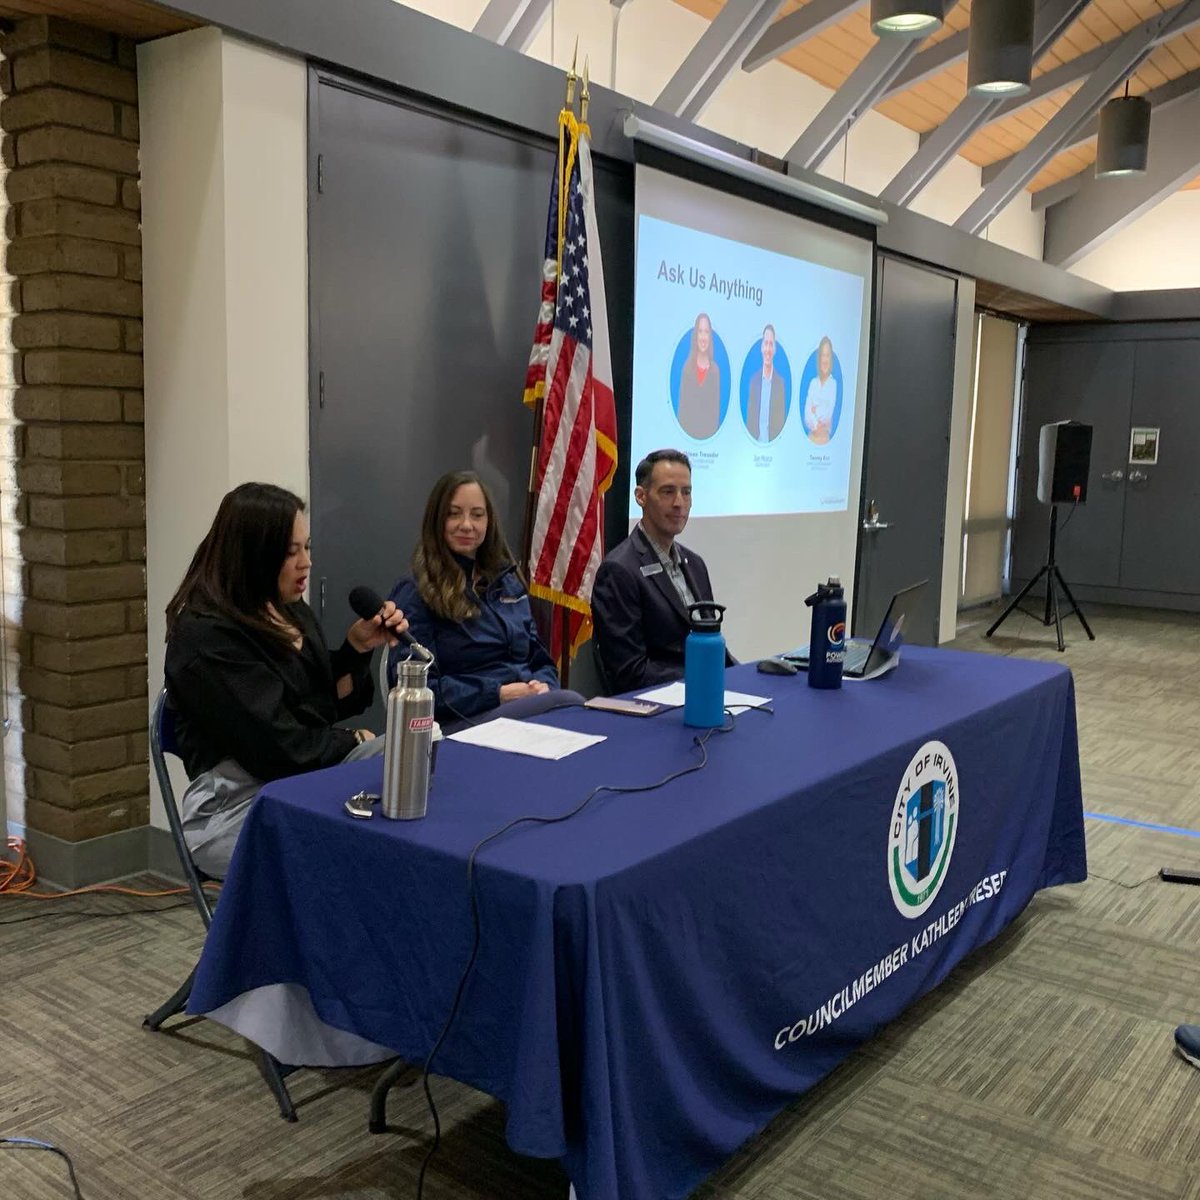 Councilmember Kathleen Treseder, OCPA CEO Joe Mosca, and I co-hosted a Town Hall event to discuss OCPA’s energy rates, answer residents’ questions, and assist with enrollments! I am proud to serve on the Board of Directors for an organization that provides cheaper energy